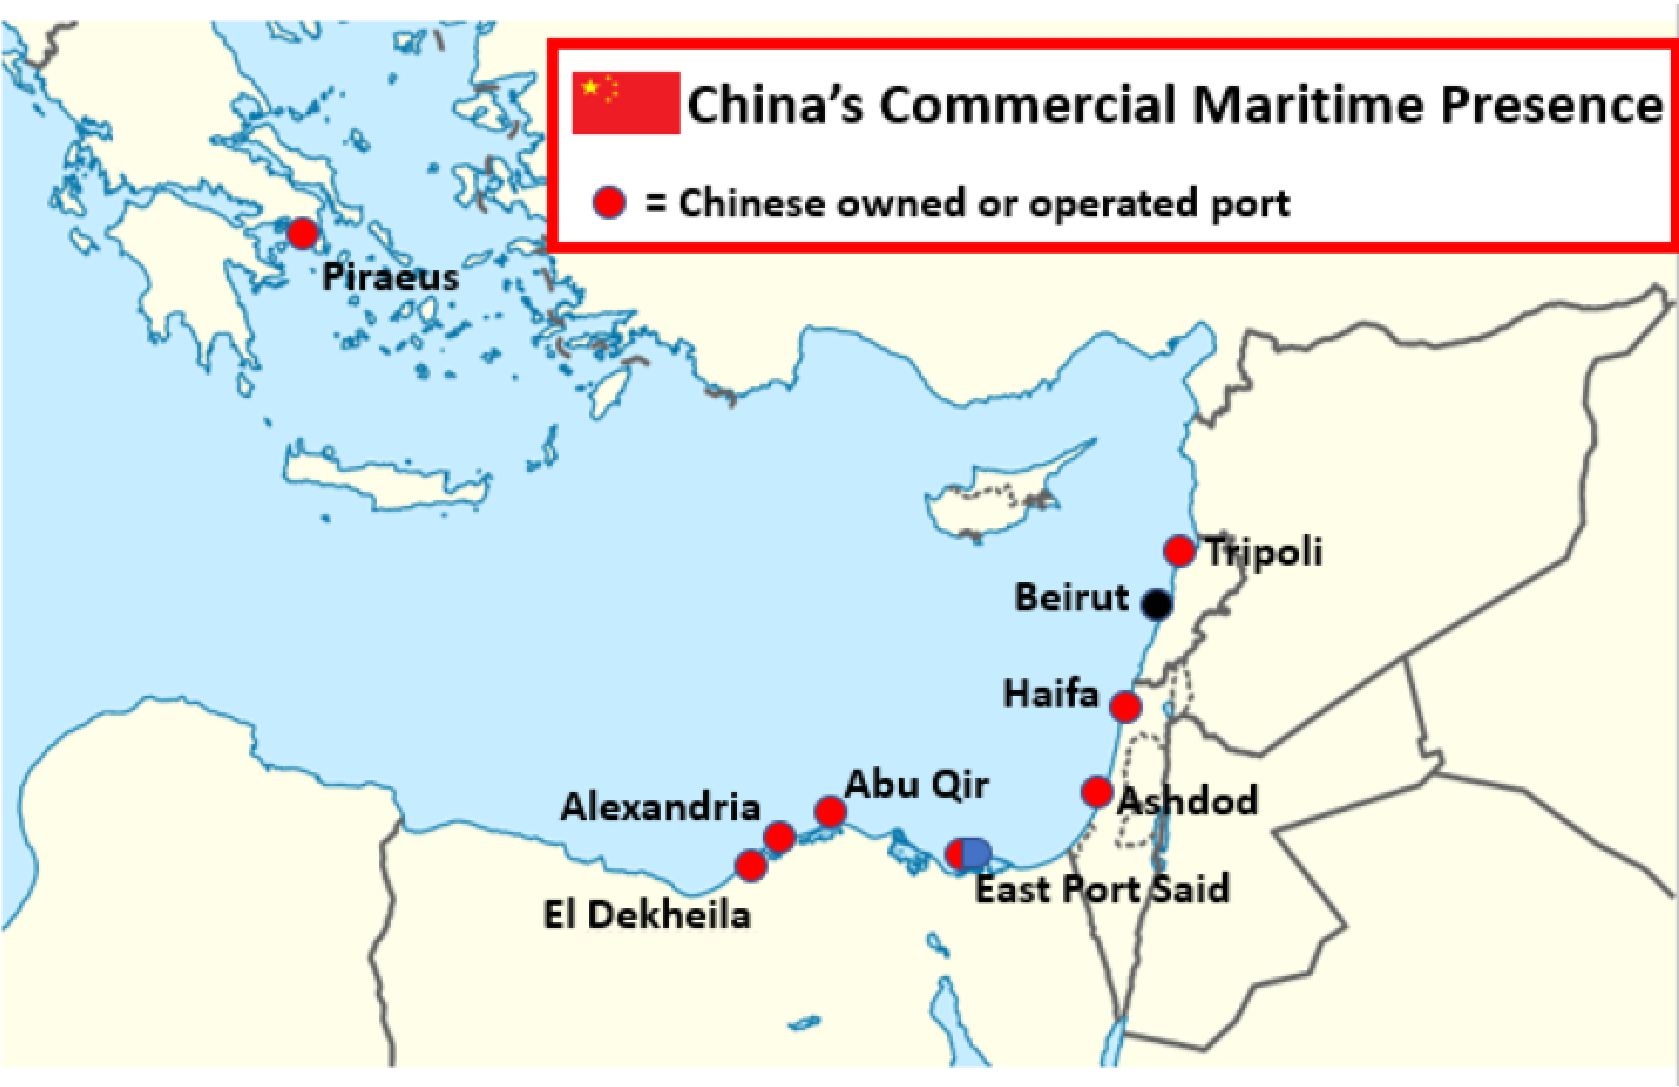 China's commercial maritime presence